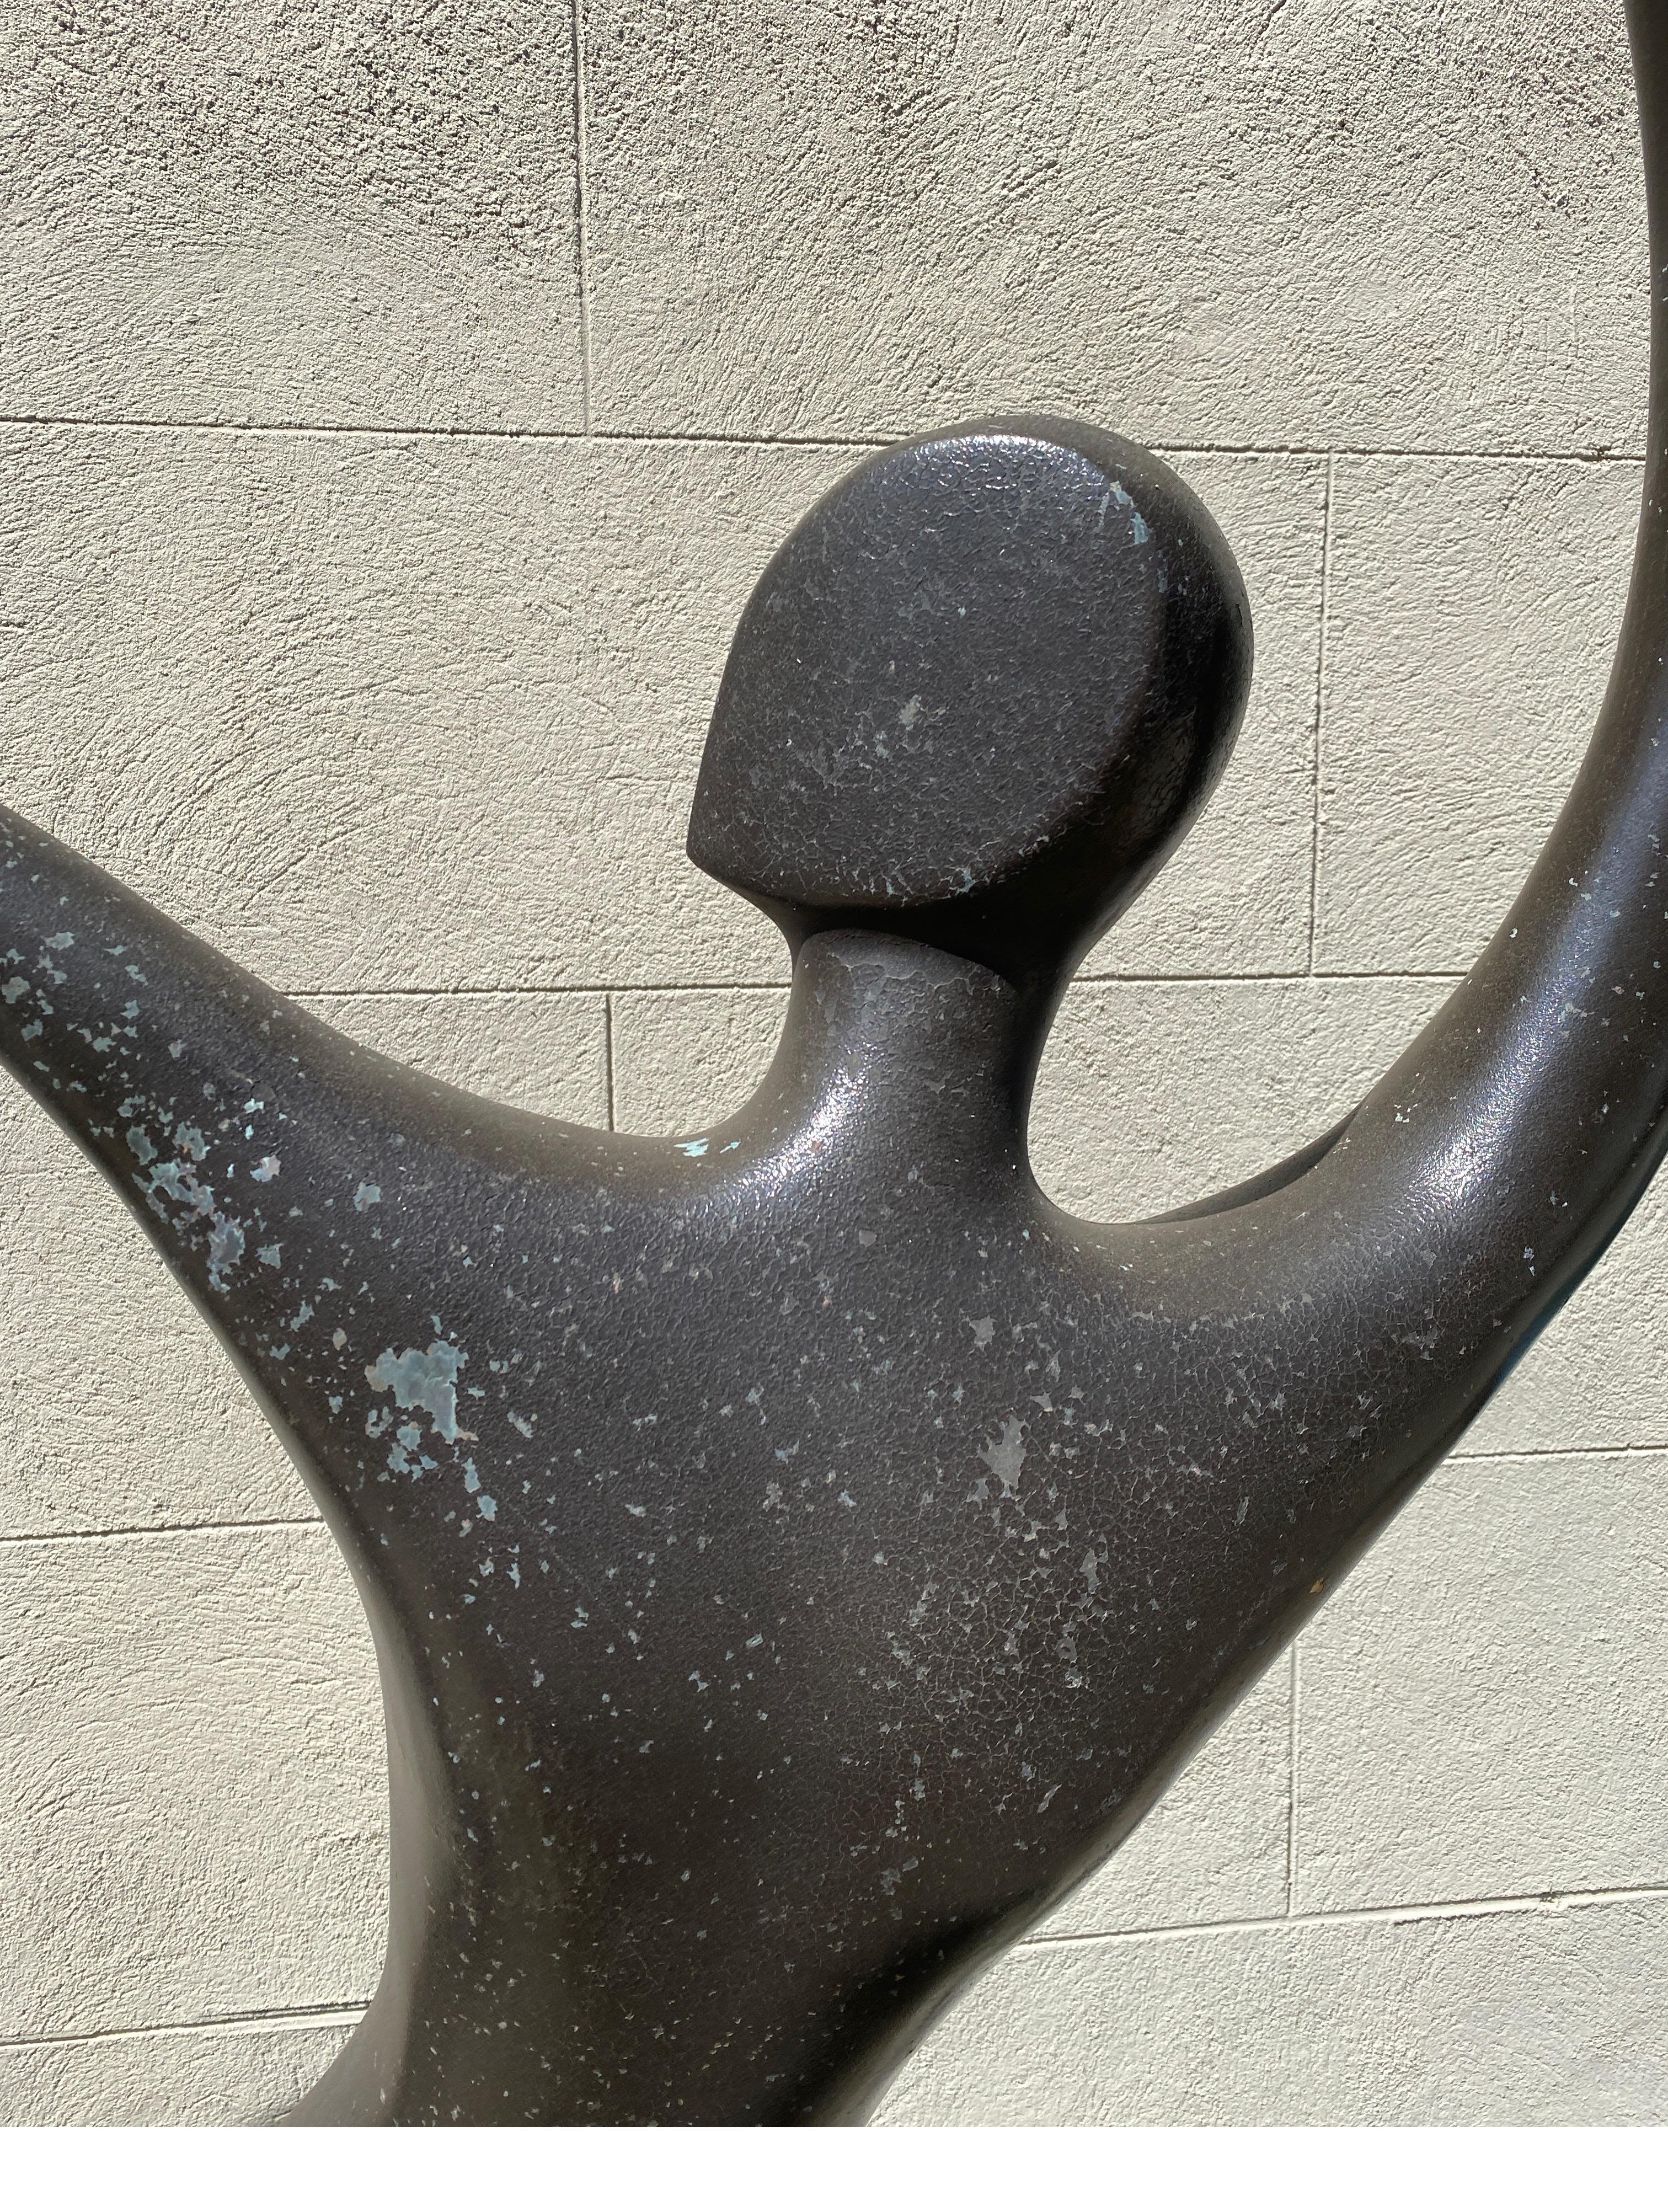 South American Bronze Sculpture Titled Bailarines by Jose Almanzor 1962-2015